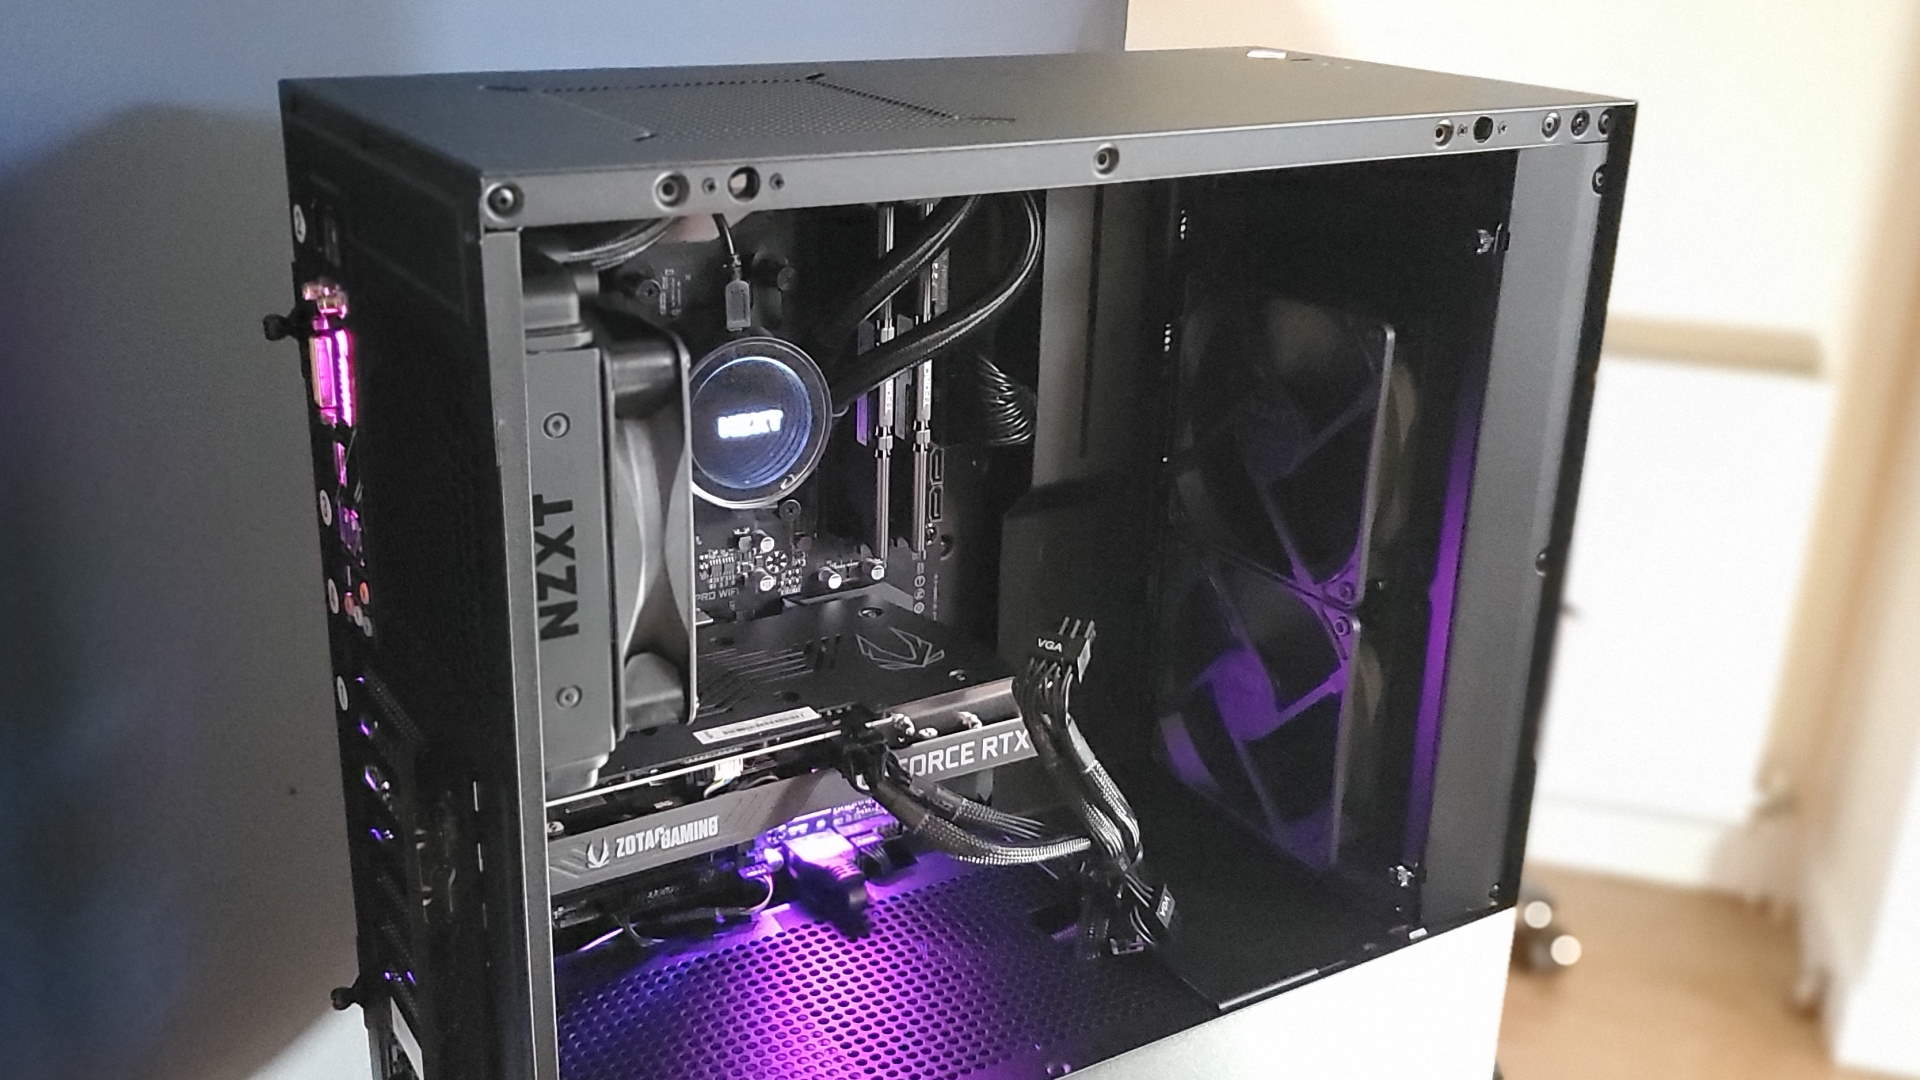 NZXT Streaming PC